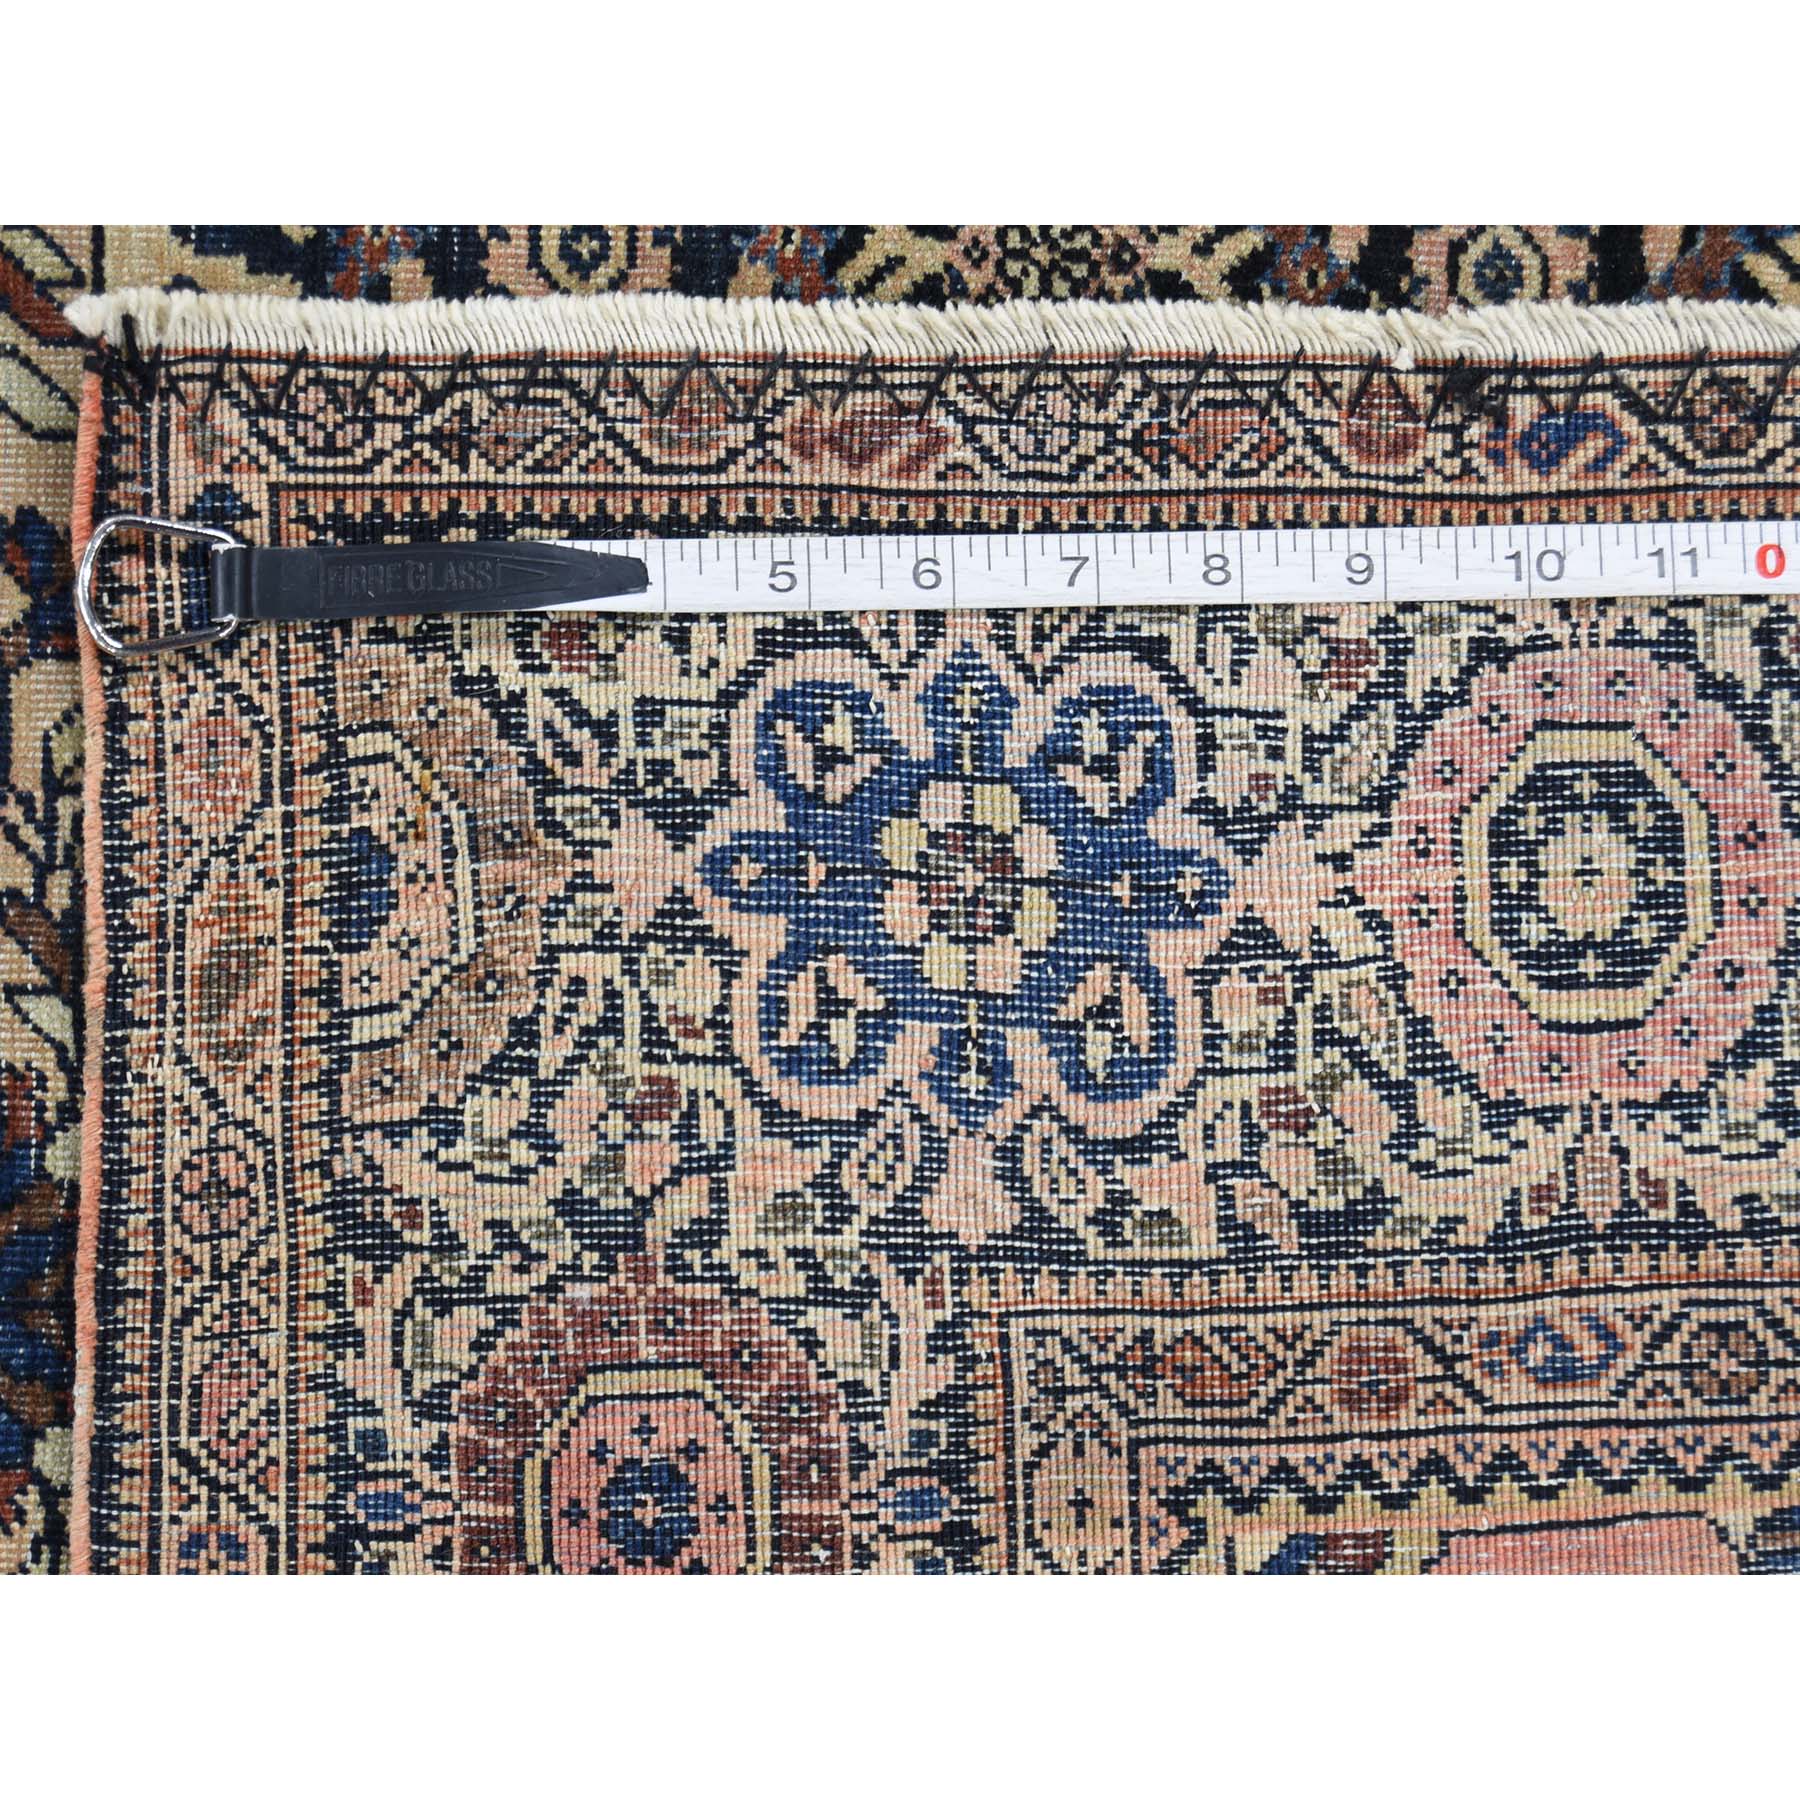 4-x6-3-- Antique Persian Fereghan Sarouk Dense Weave Even Wear Hand-Knotted Rug 